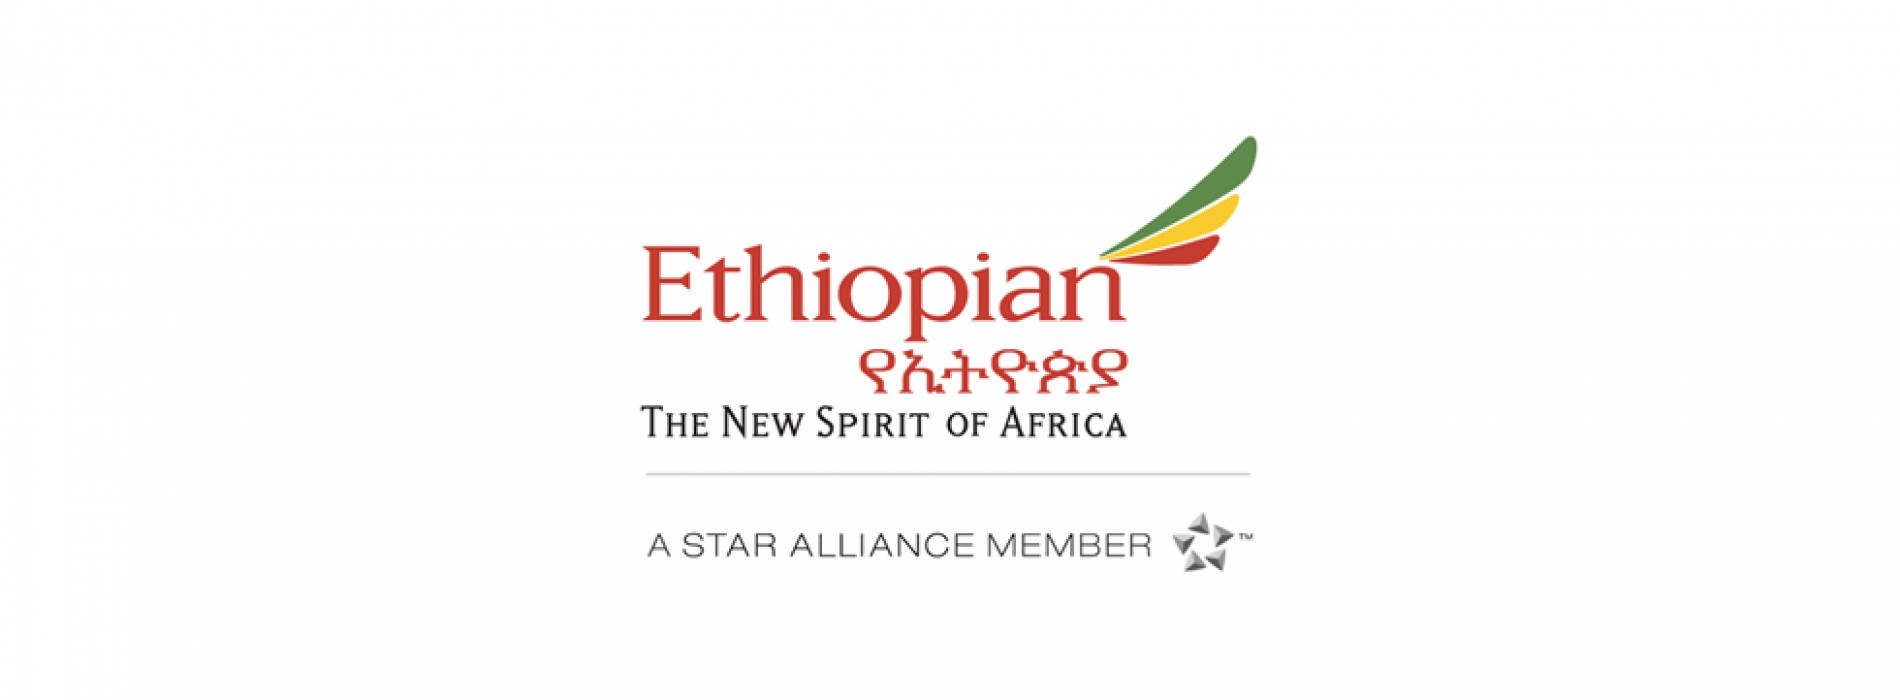 Ethiopian Airlines wins “The Rising Star Carrier of the Year Award”